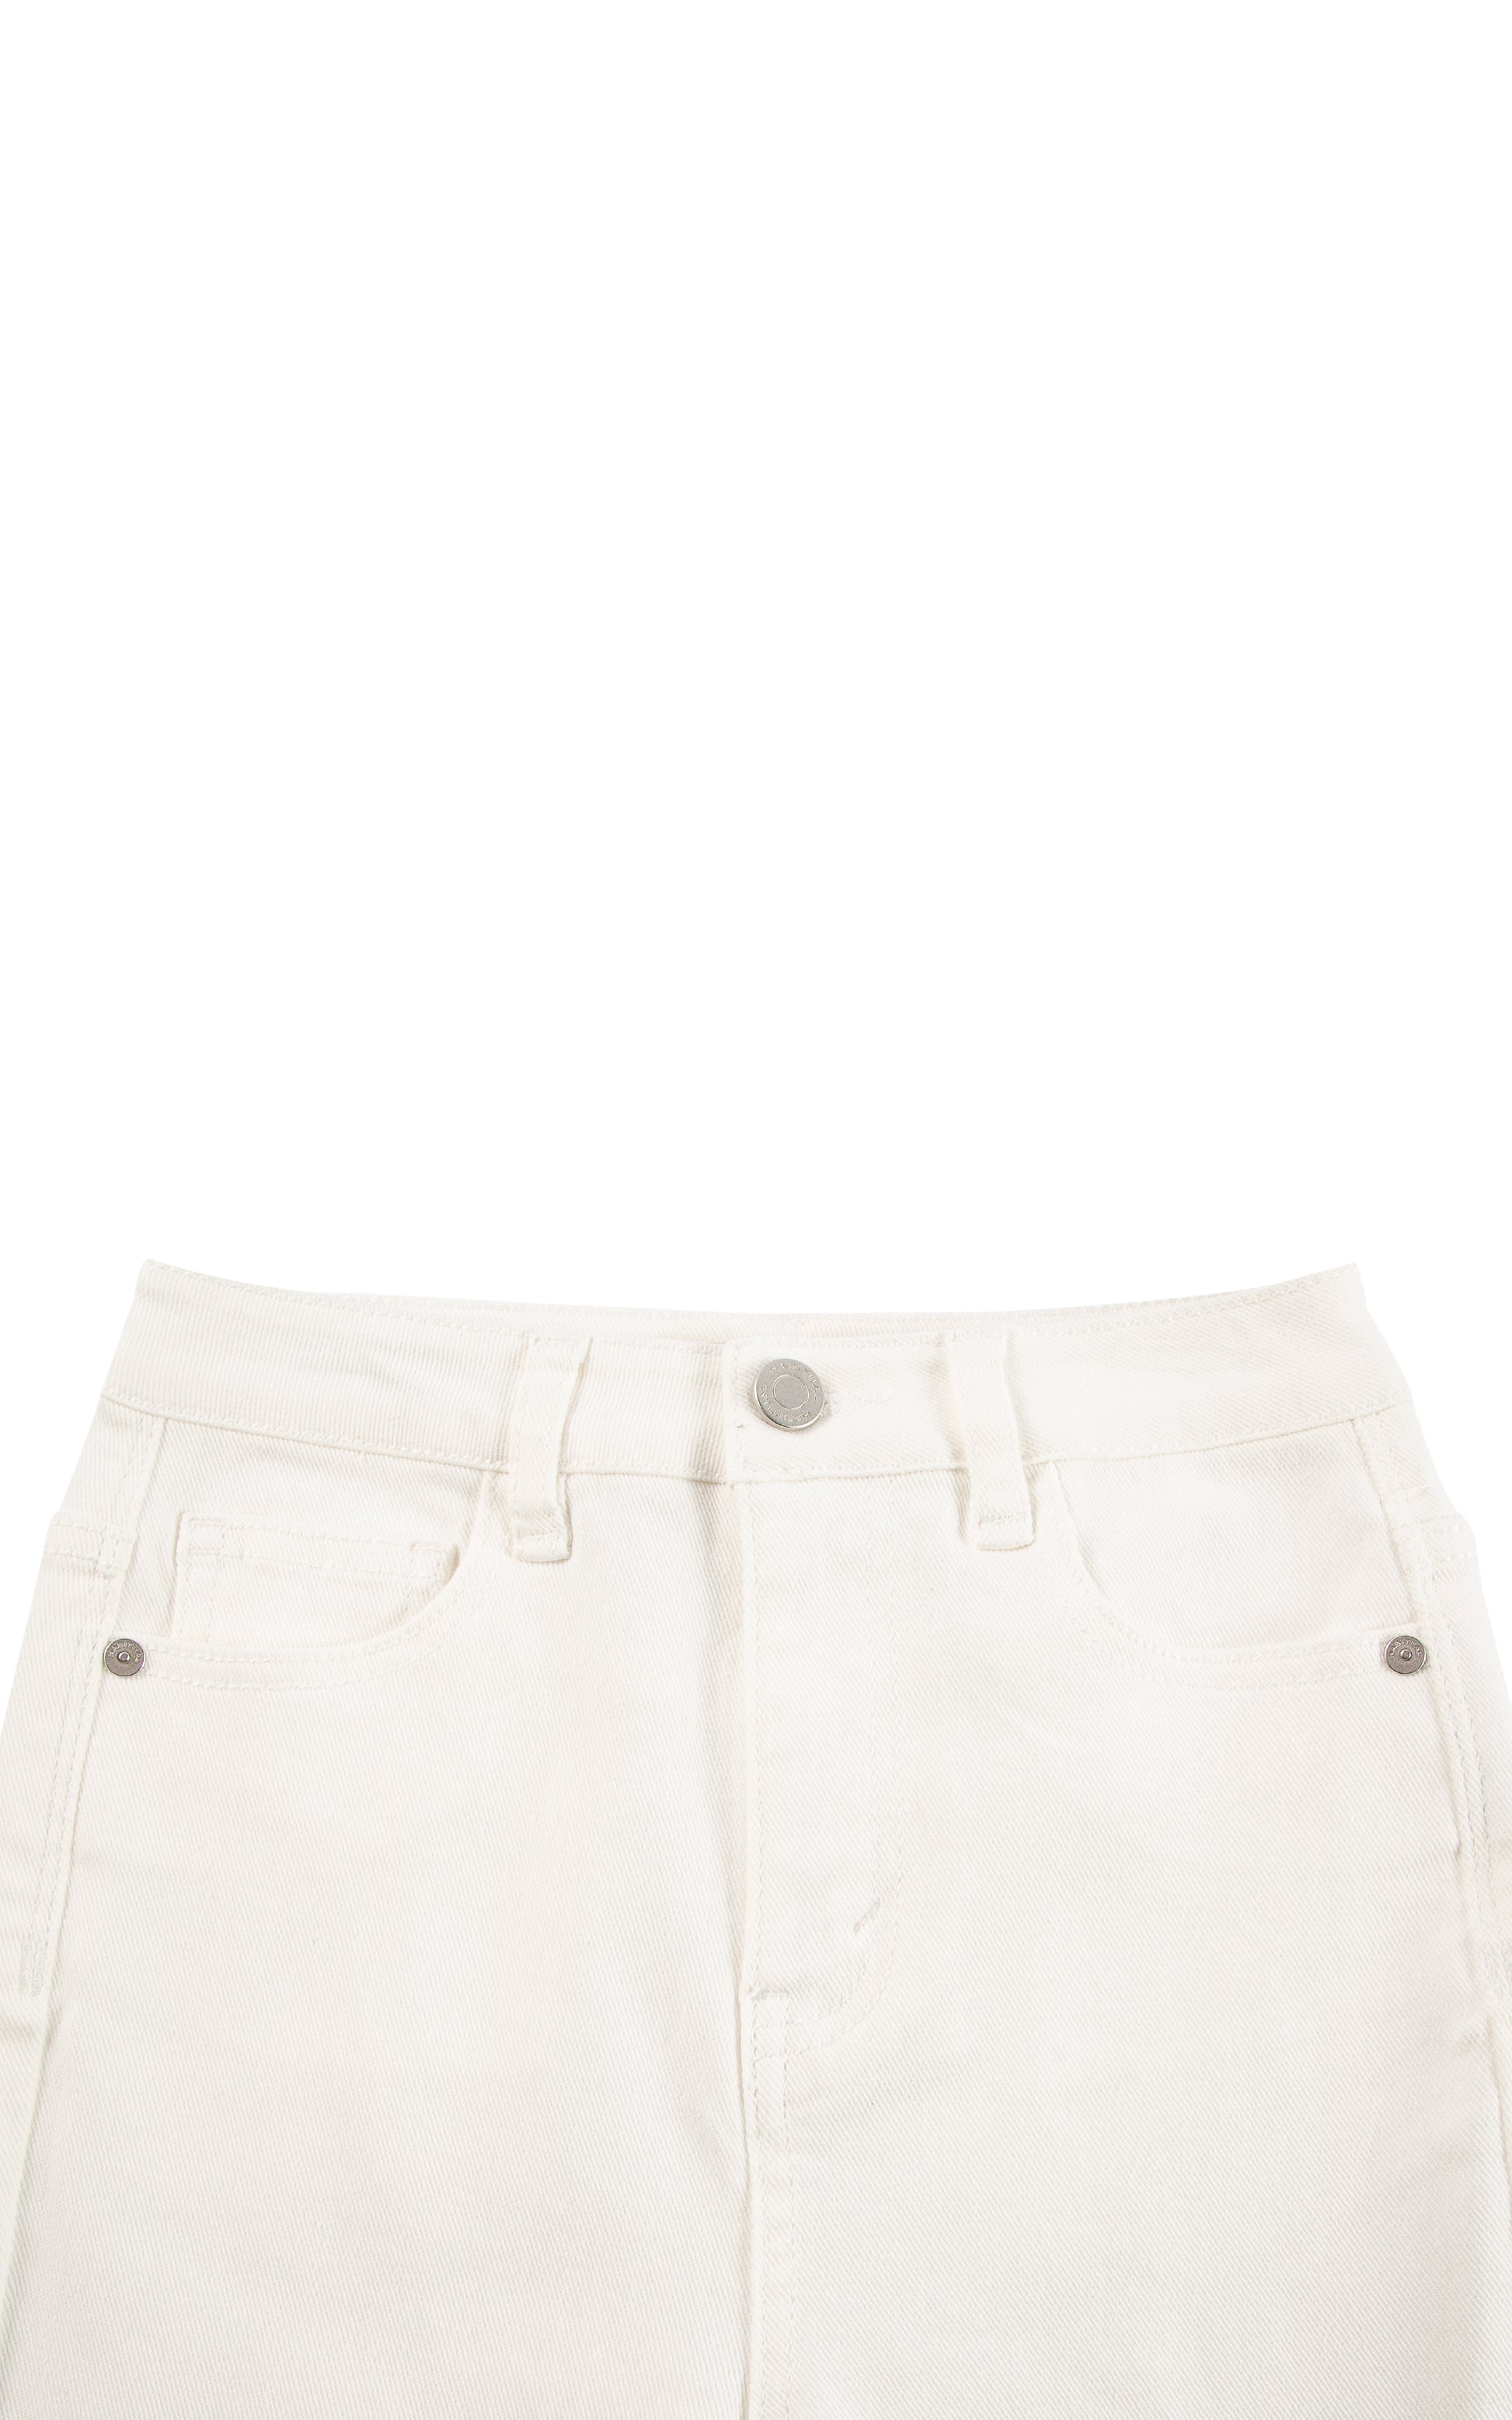 CLOSE UP OF BUTTON UP WAISTBAND OF WHITE JEANS 